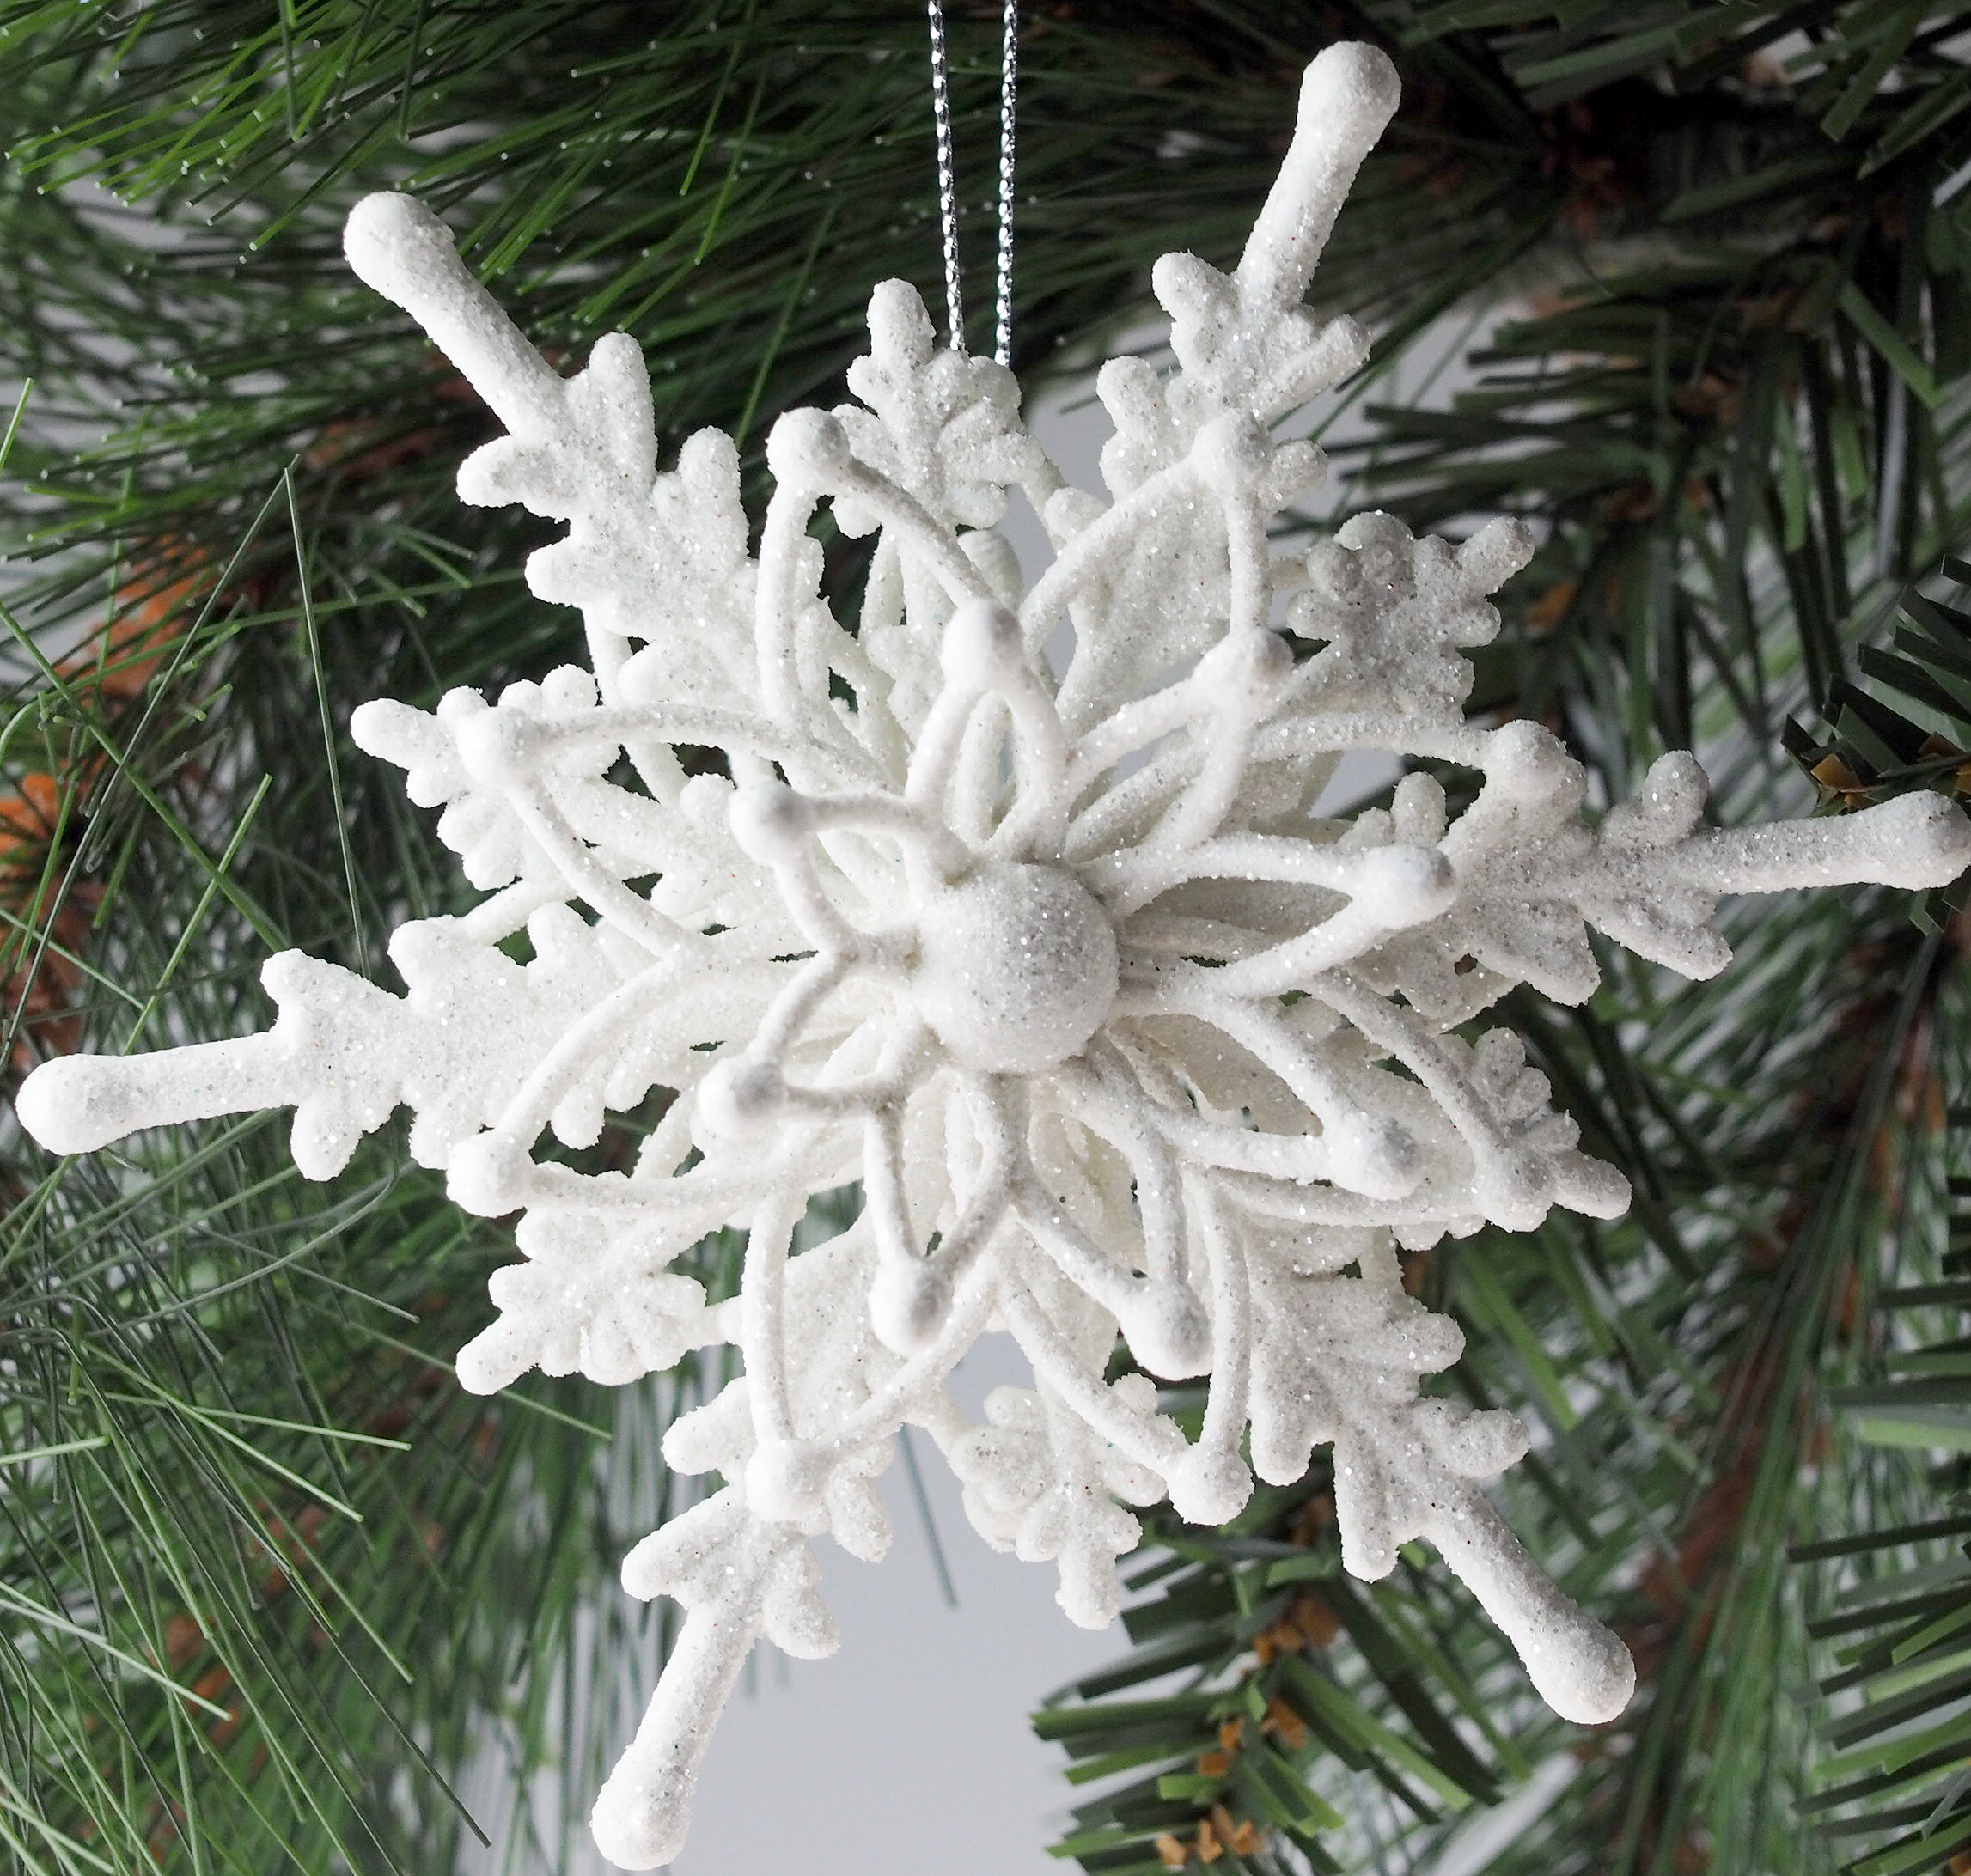 Large 3D Ornate White Snowflake Christmas Tree Baubles Decorations (Set of 6)